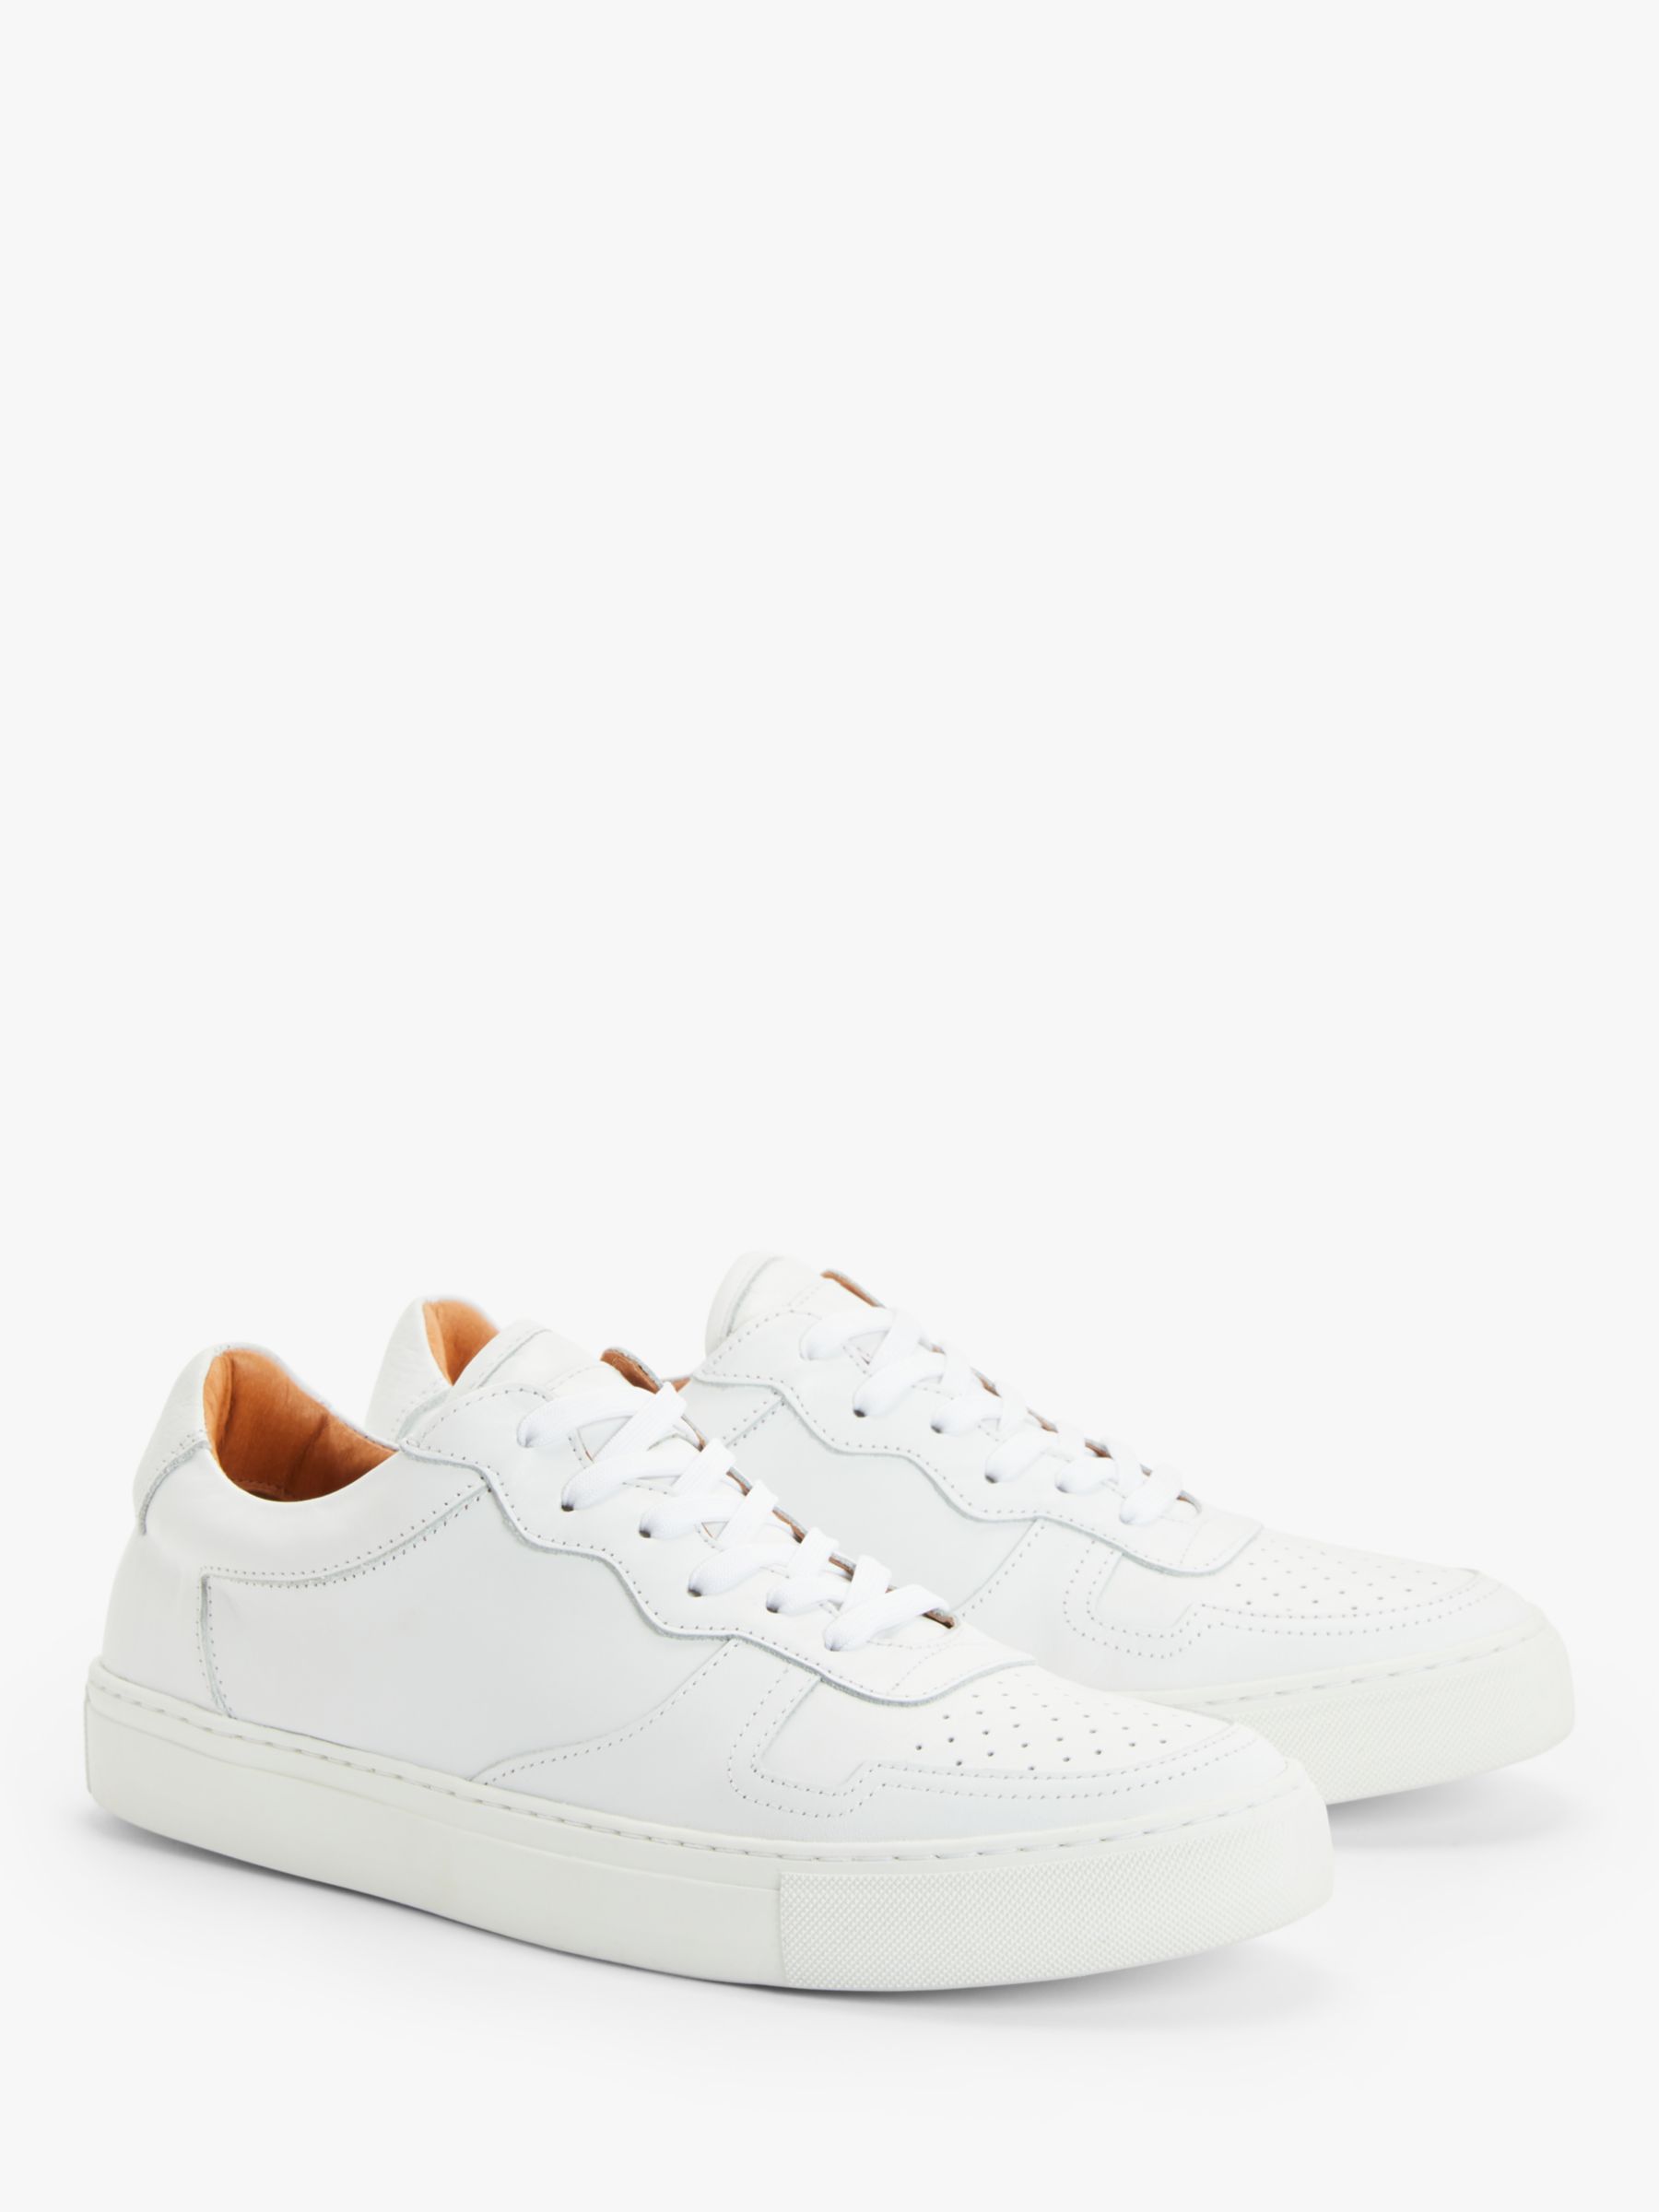 John Lewis & Partners Leather Cupsole Trainers, White